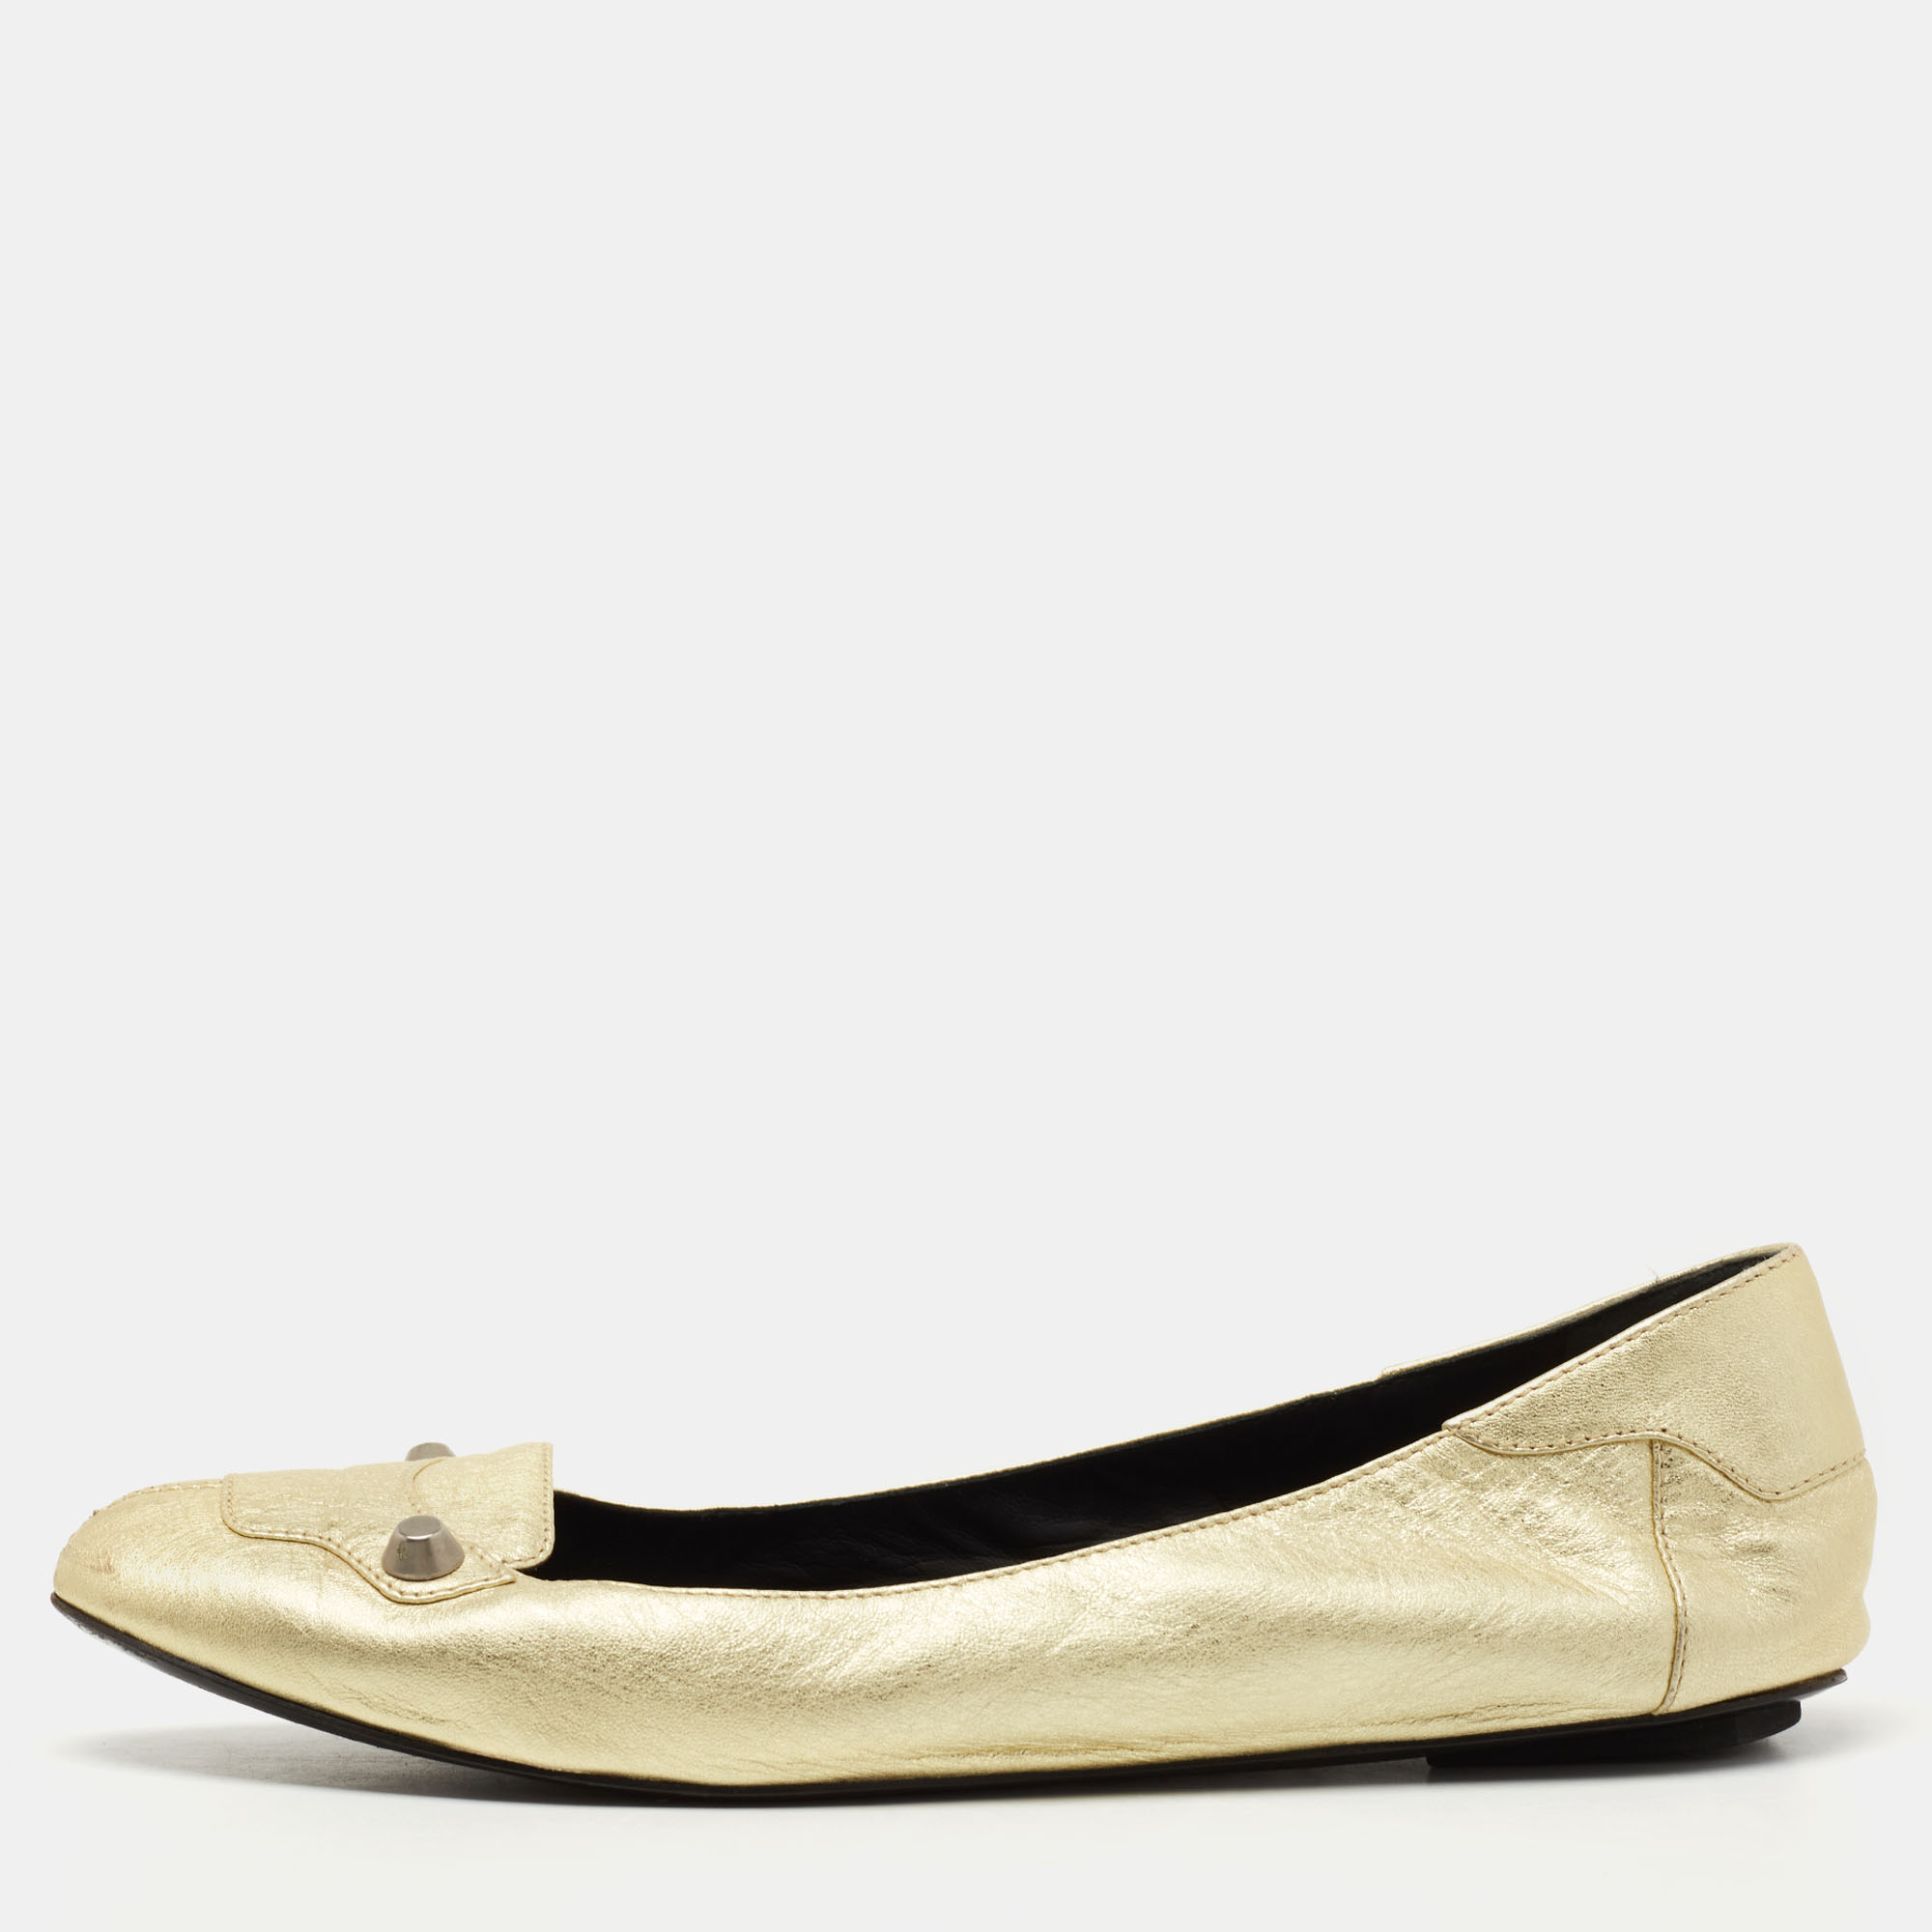 Pre-owned Balenciaga Gold Leather Studded Ballet Flats Size 38